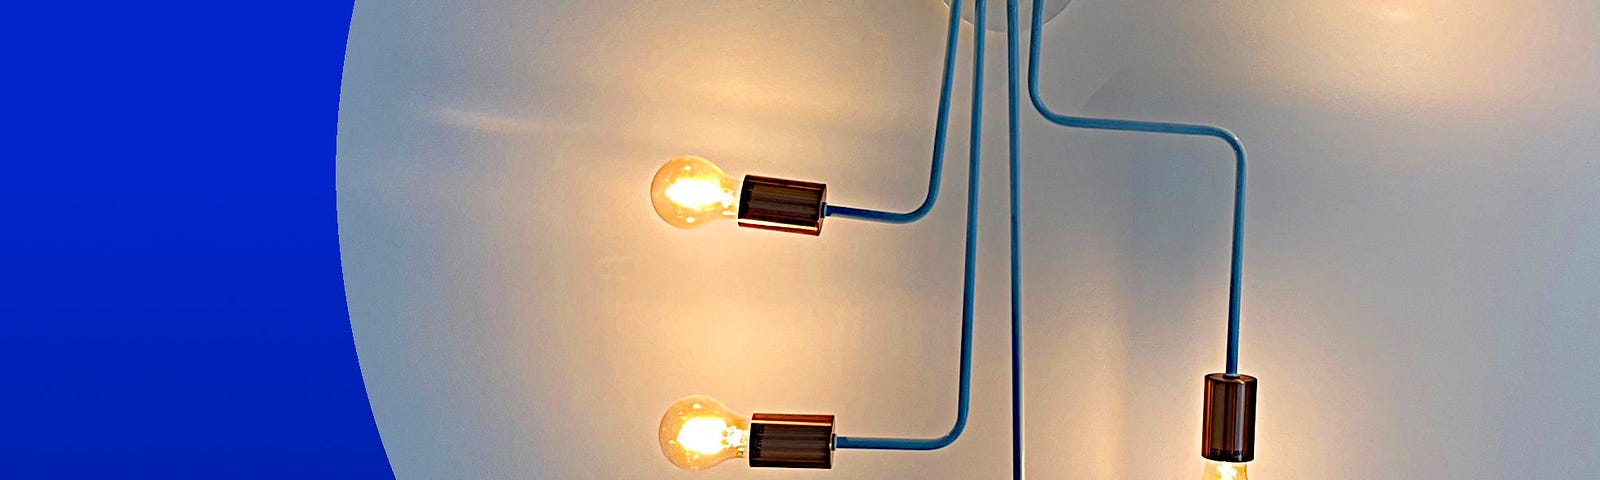 Lightbulbs connected to a hub with wires